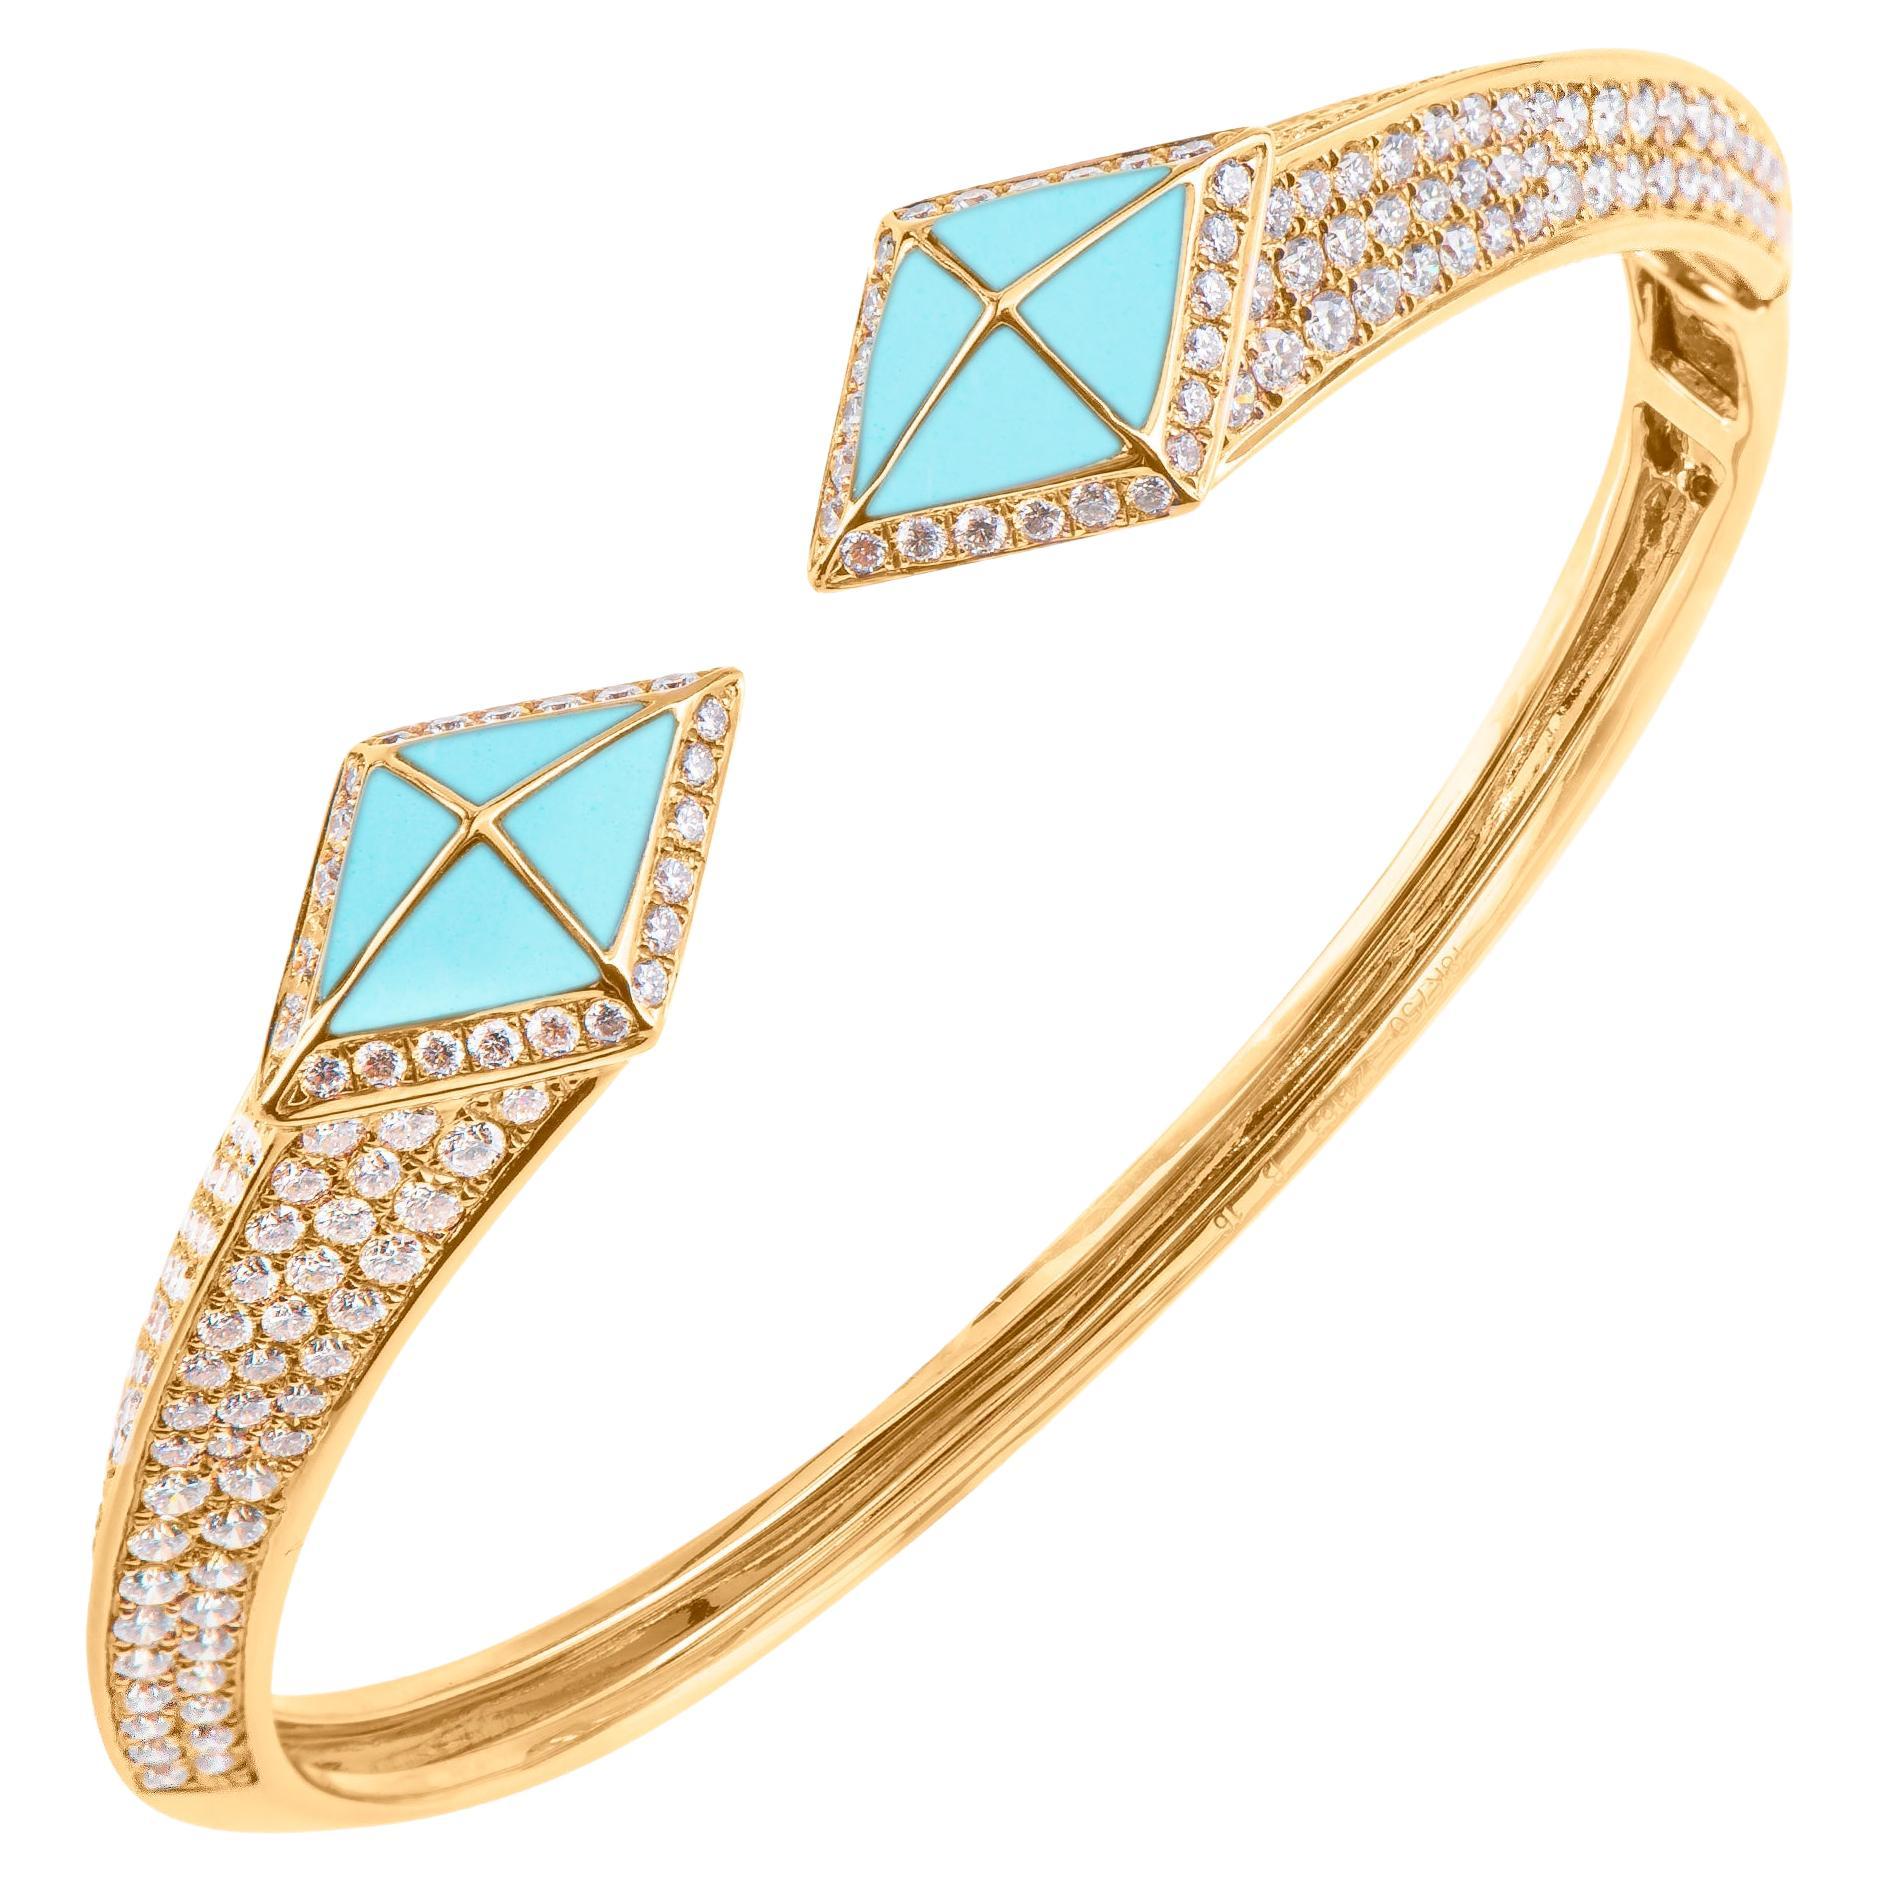 Tetra Hydra Bangle with Turquoise and Diamonds in 18k Yellow Gold